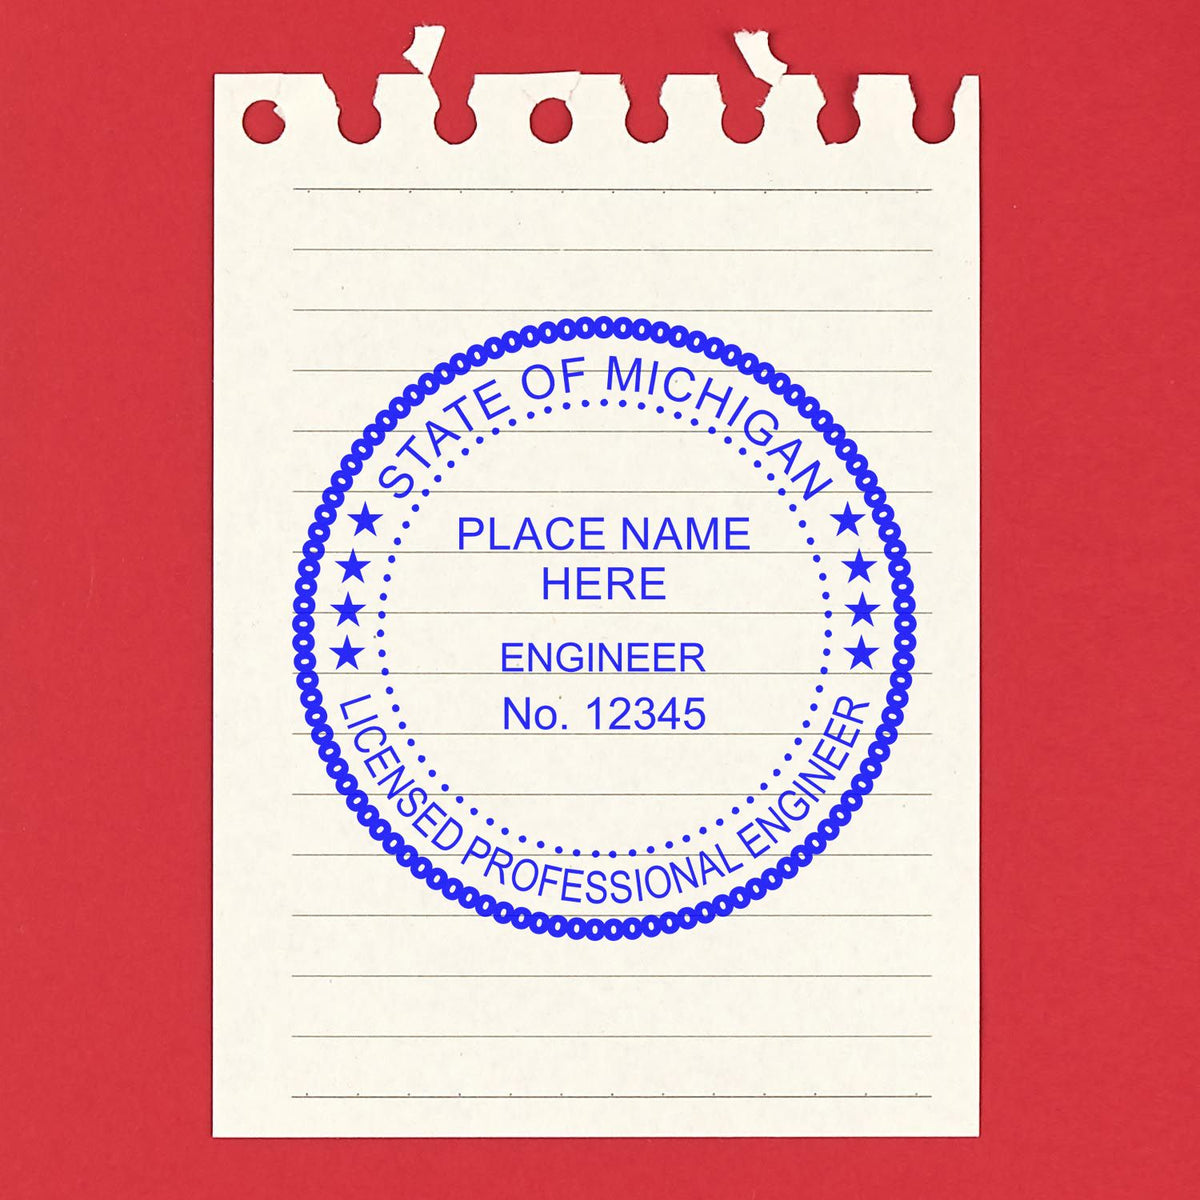 The Slim Pre-Inked Michigan Professional Engineer Seal Stamp stamp impression comes to life with a crisp, detailed photo on paper - showcasing true professional quality.